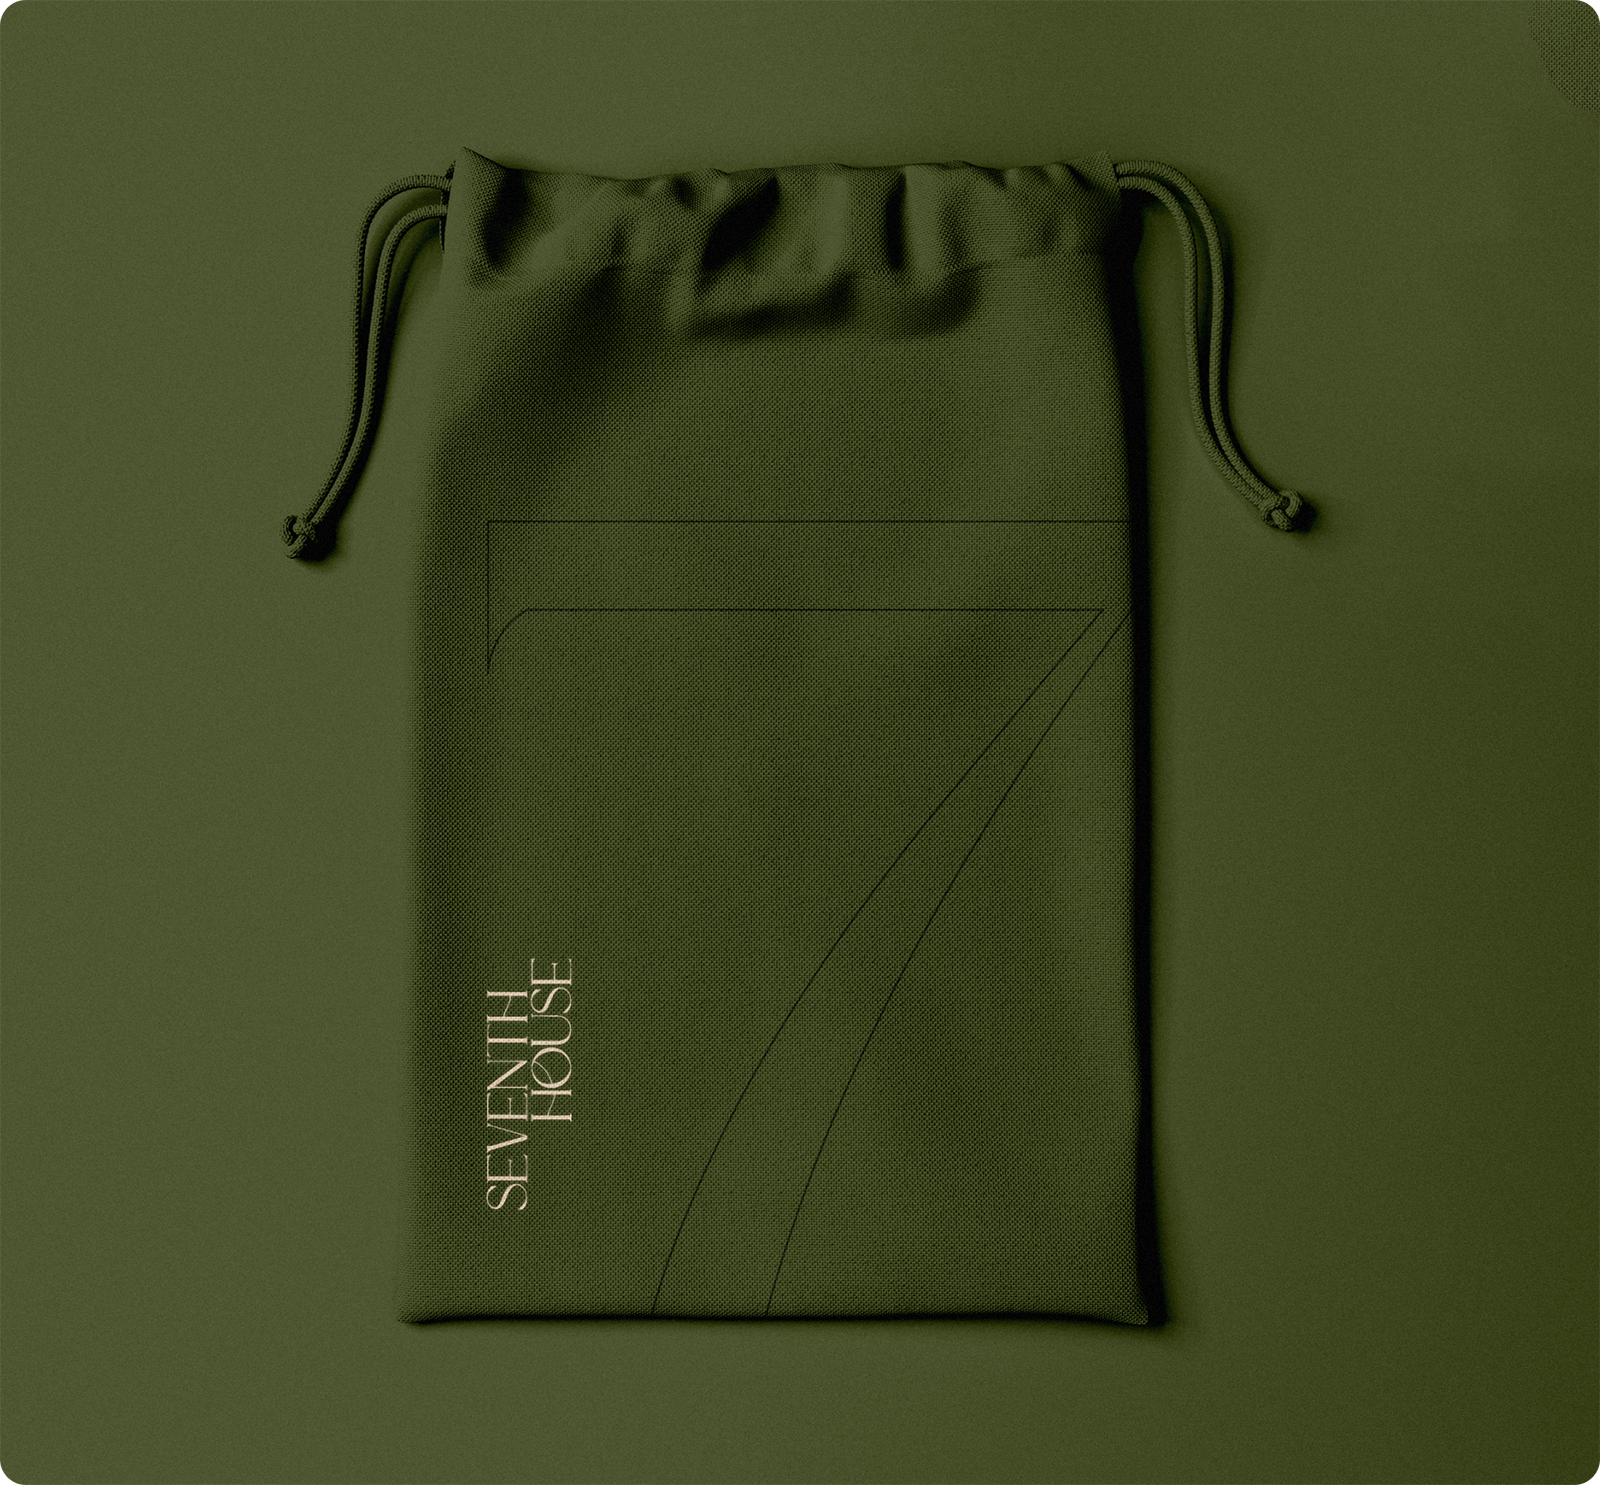 Img-Sq-7H-DustBag-scaled-1